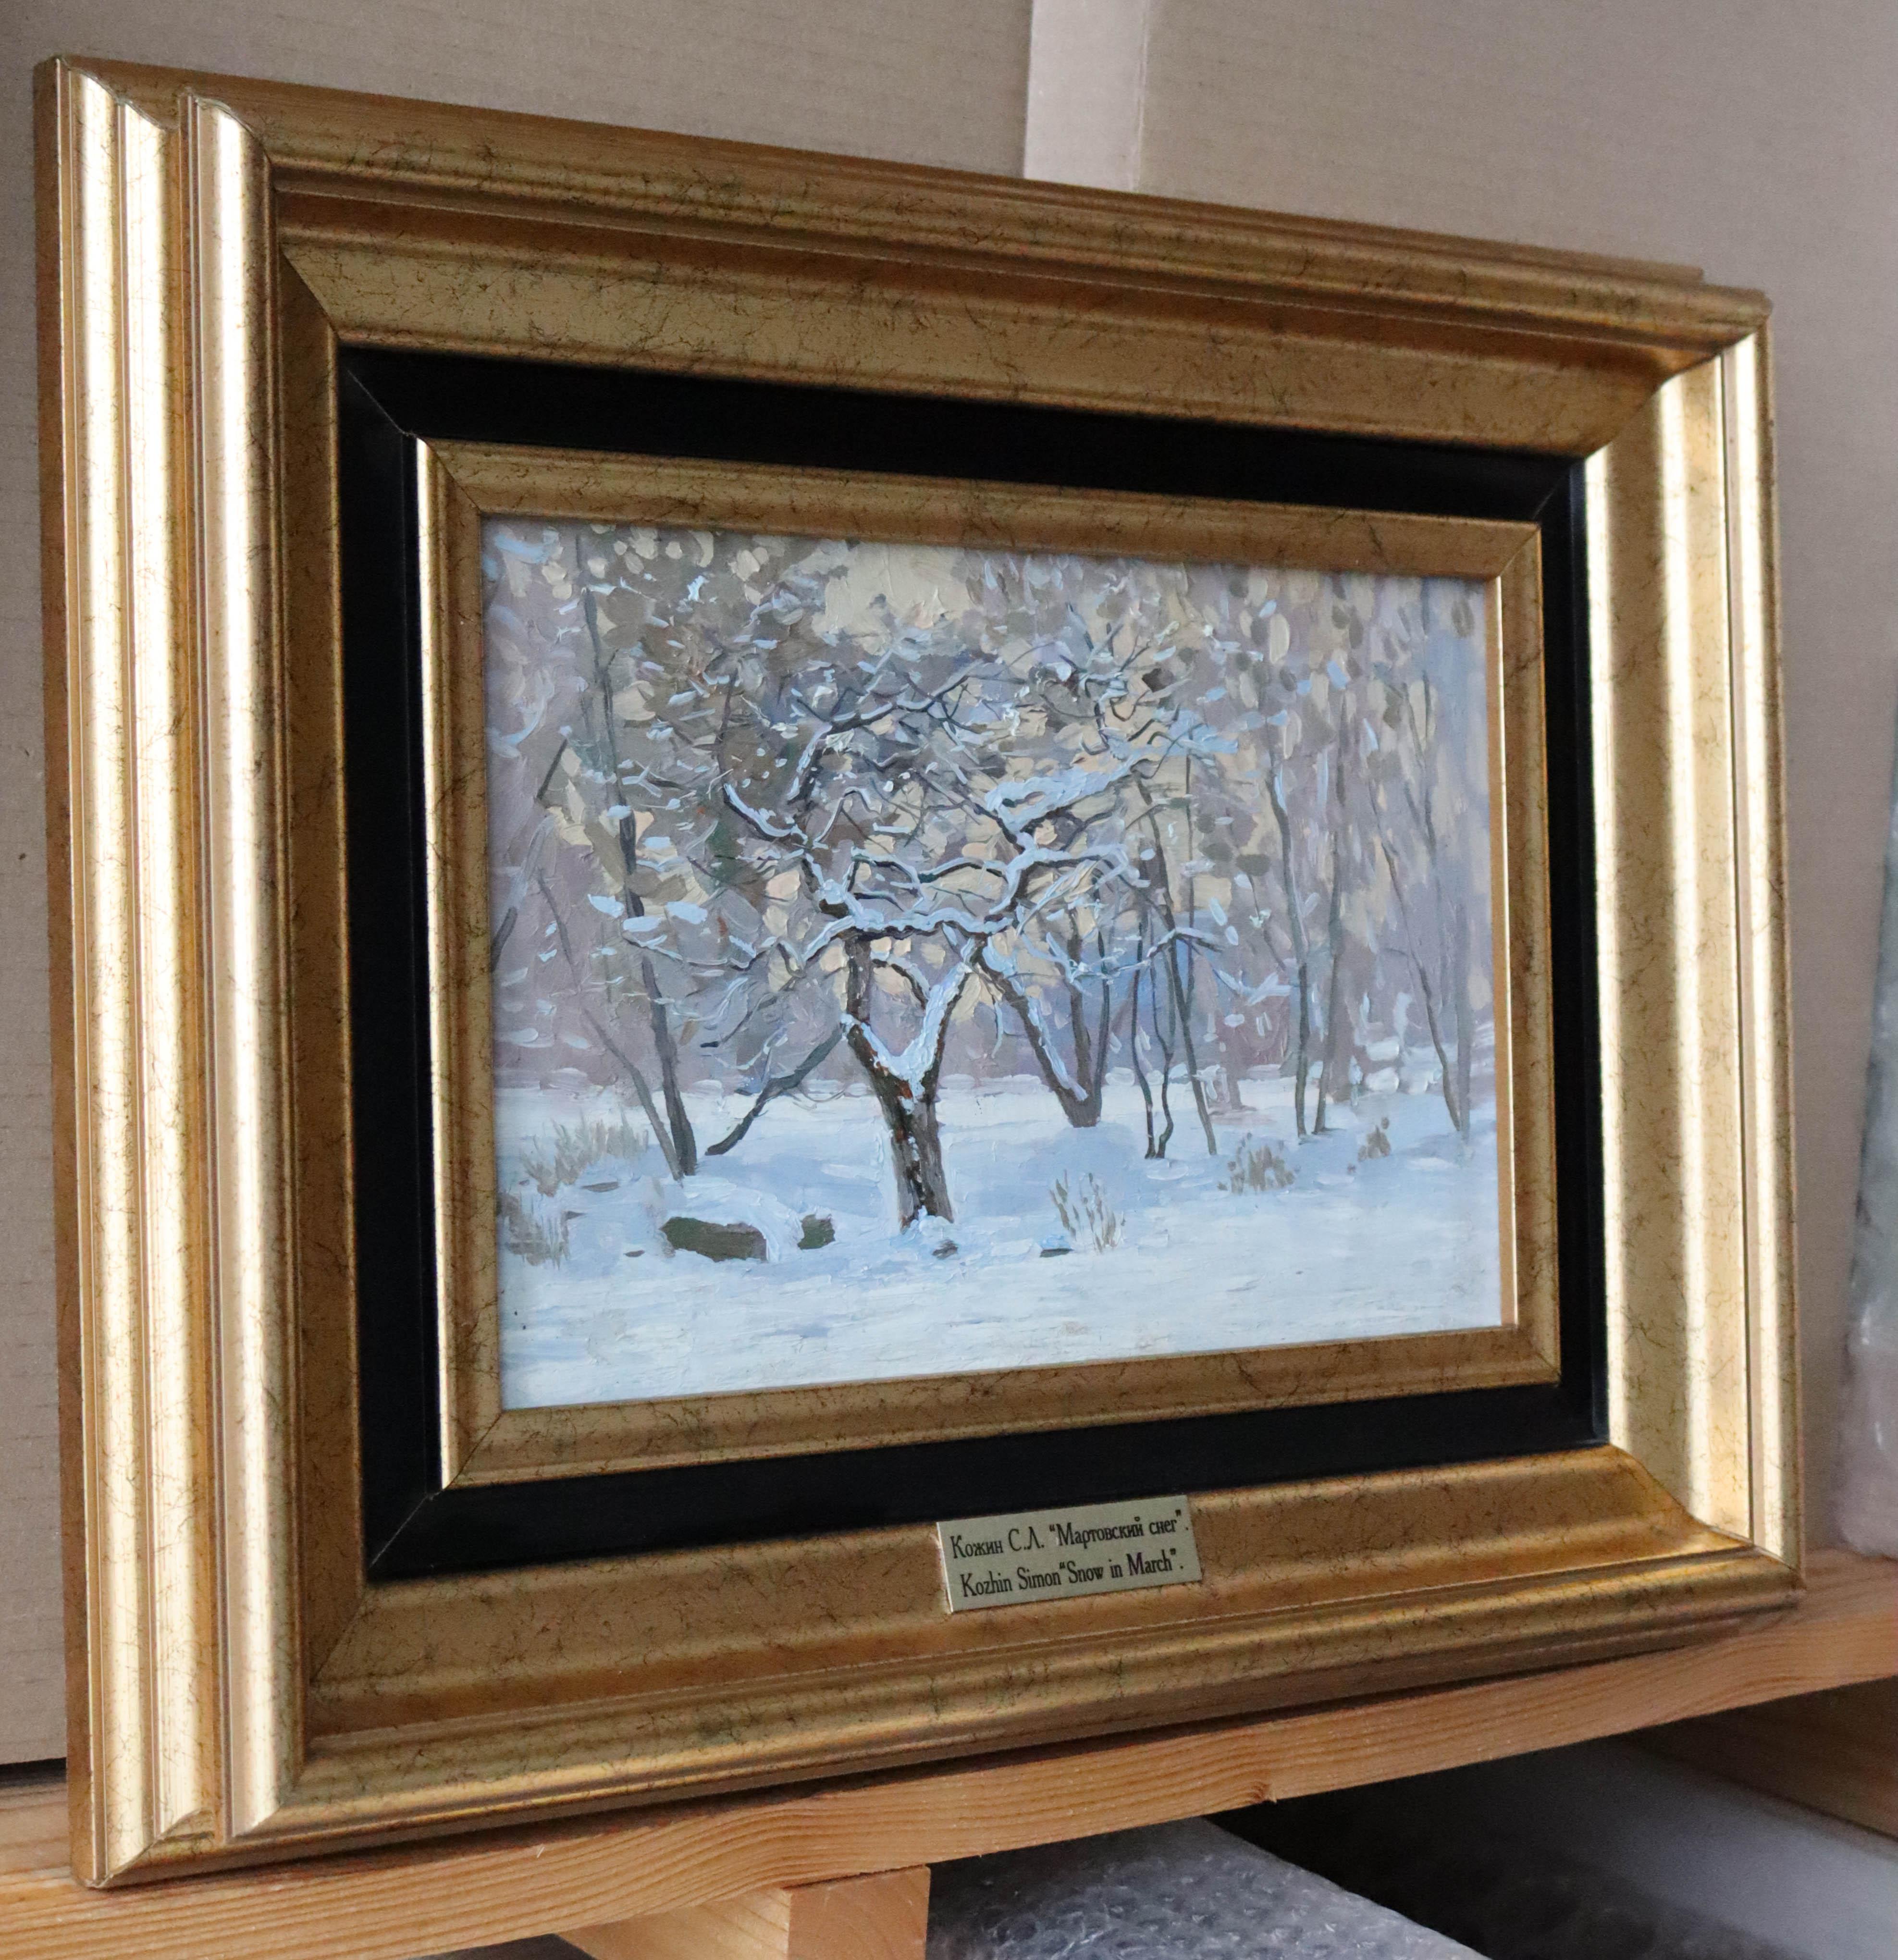 PLEASE NOTE: The painting will be shipped without a frame. The framing option is on request with additional shipping costs.

An apple tree with snow-covered branches in winter is a decorative tree with a beautiful silhouette against the background